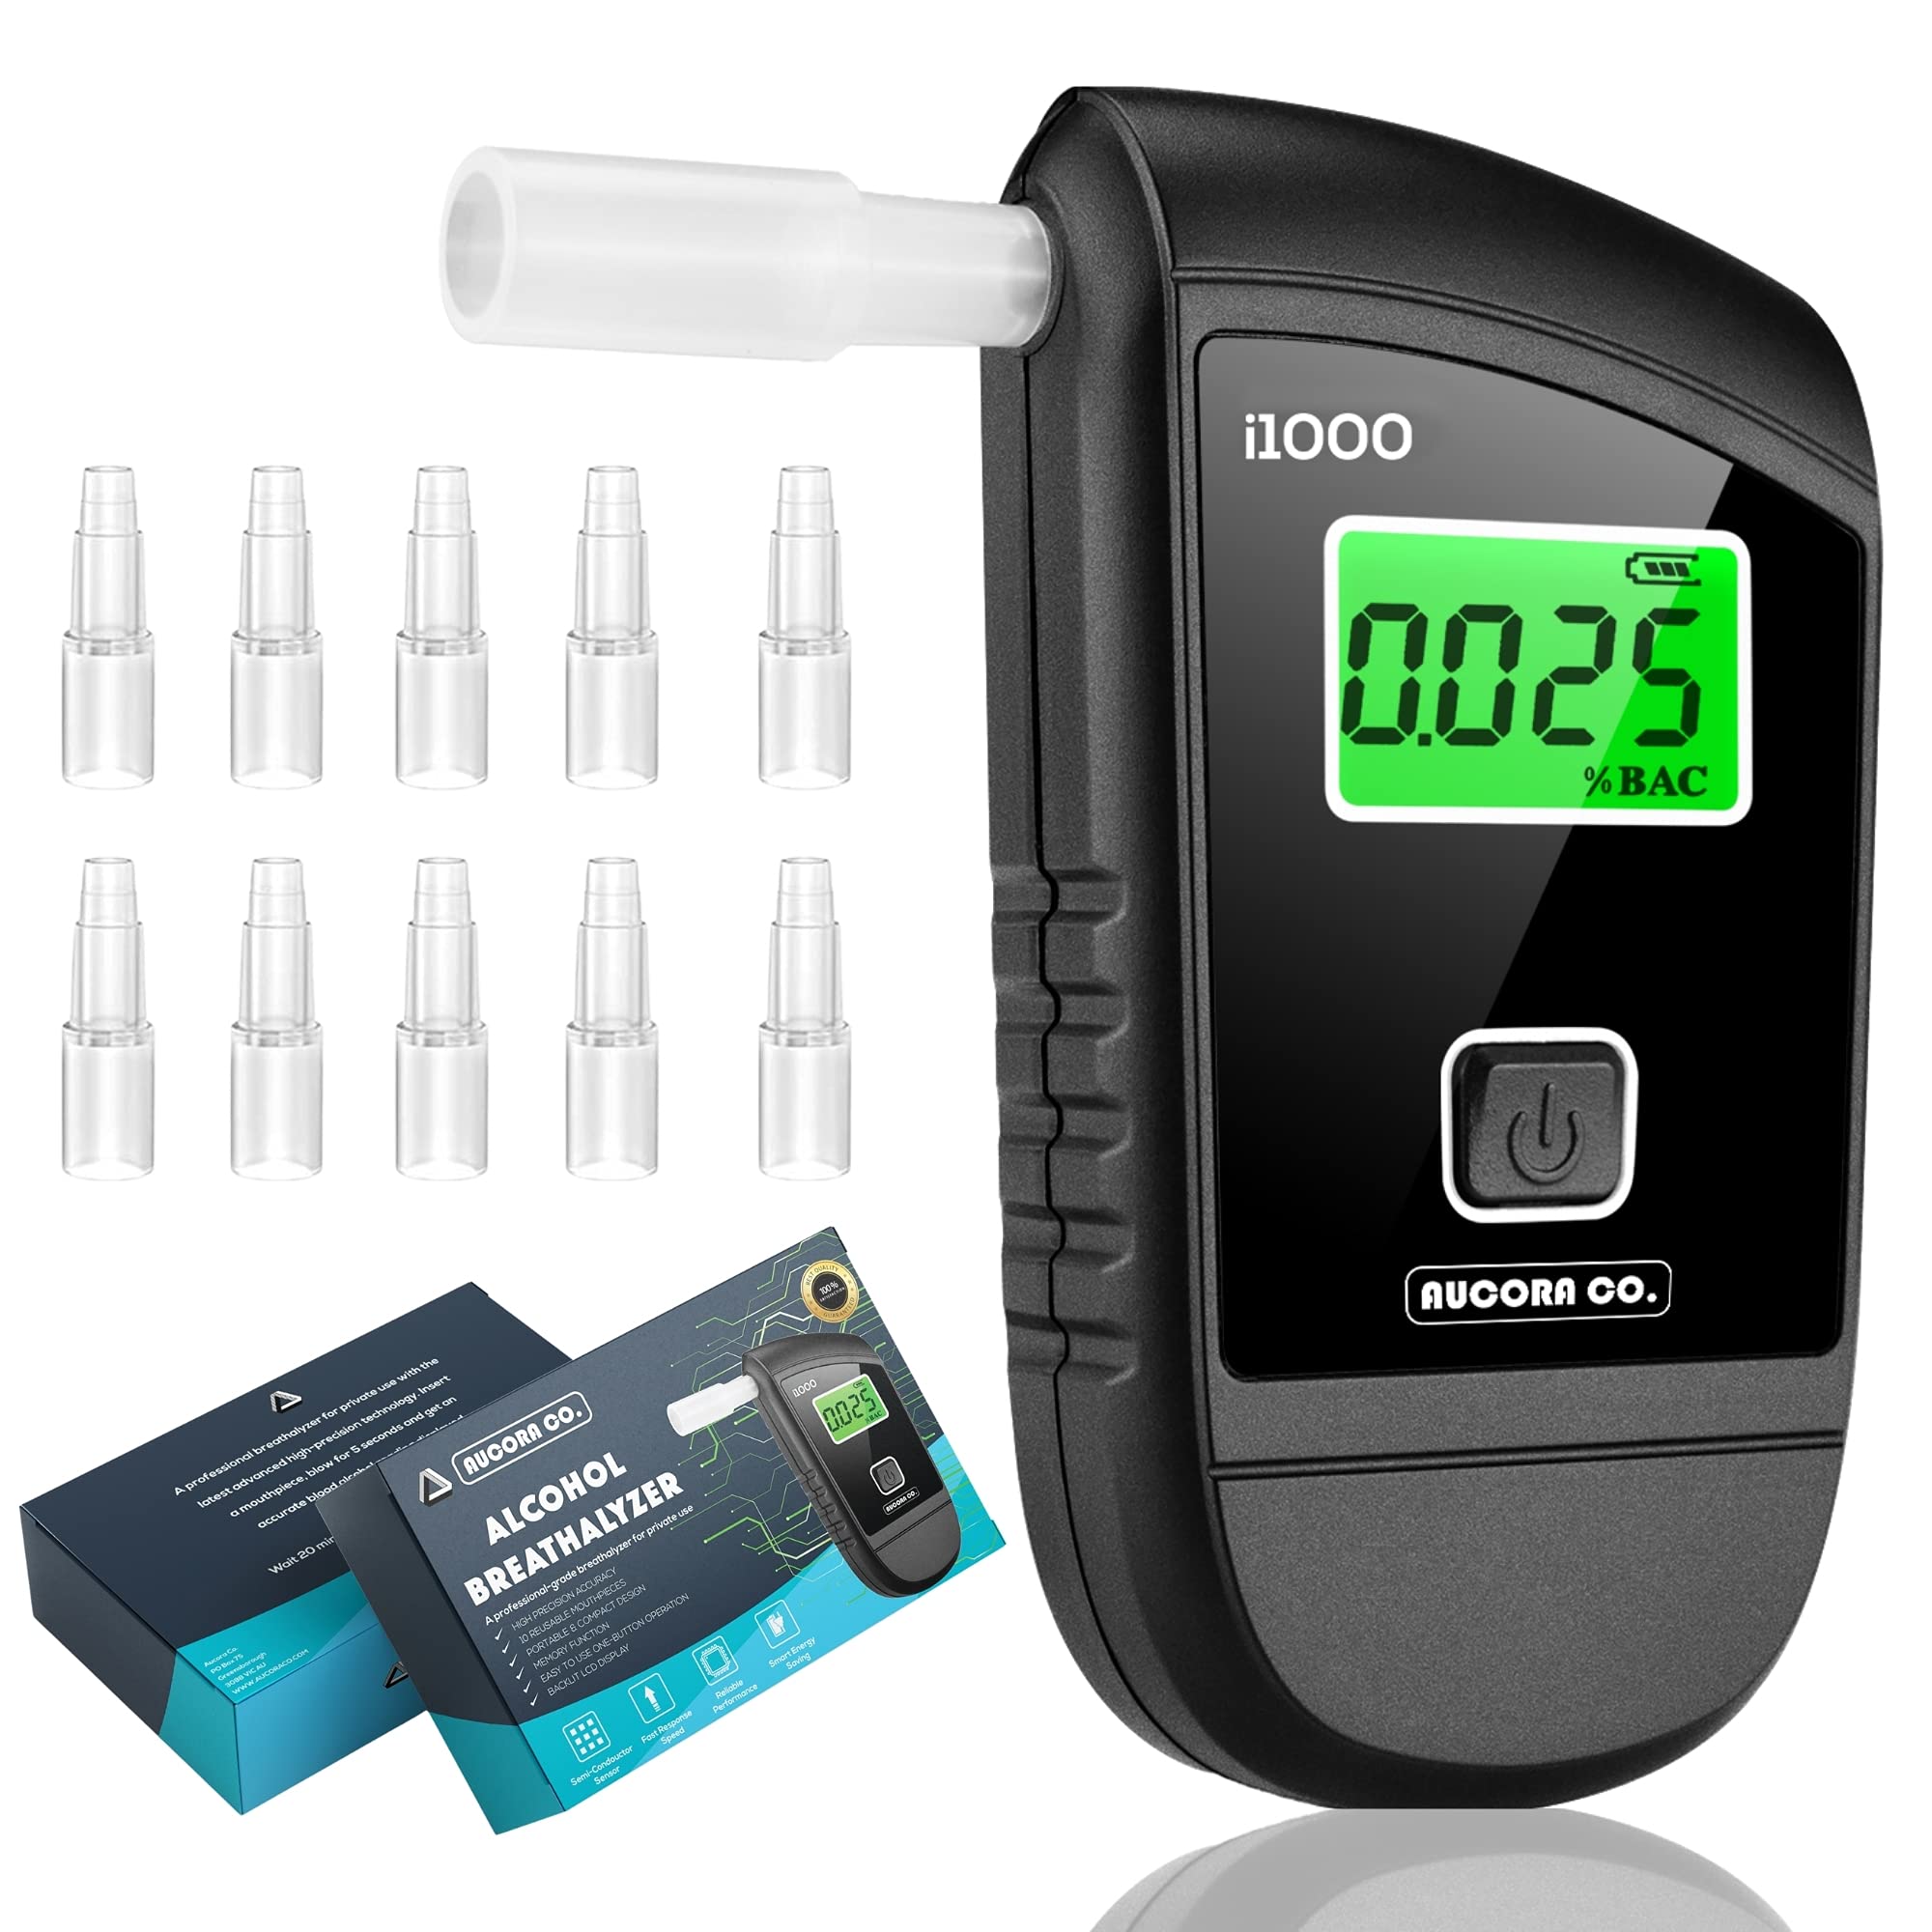 Breathalyzer, FDA Cleared Portable Alcohol Tester with Digital LCD Screen &  10x Mouthpieces, Fast Accurate Blood